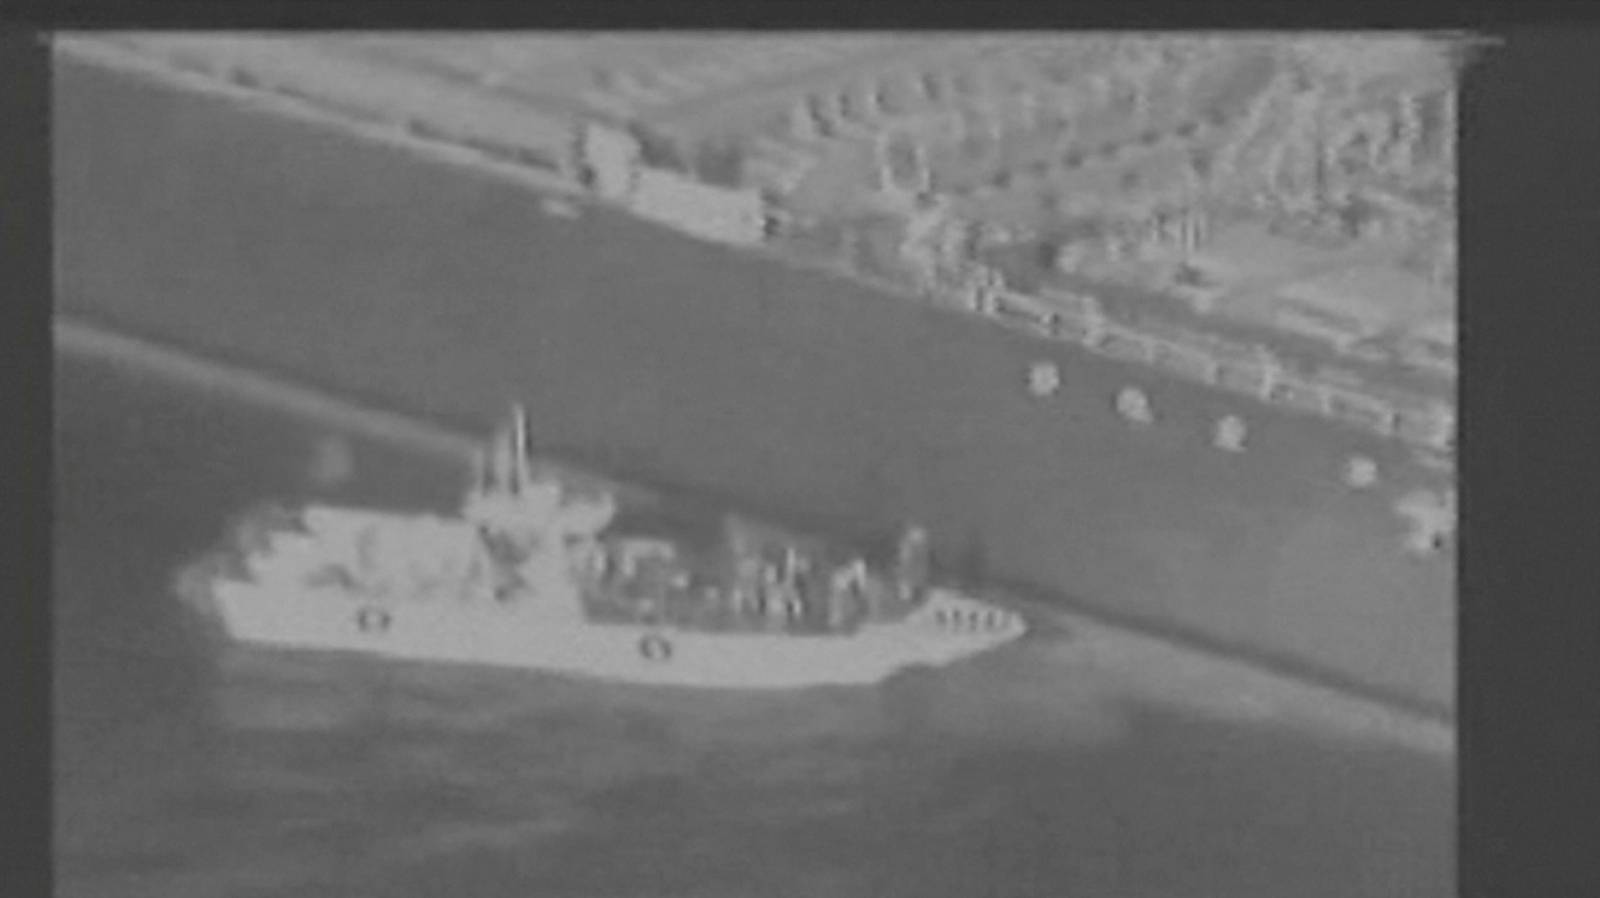 Still image taken from a U.S. military handout video purports to show Iran's Revolutionary Guard (IRGC) removing an unexploded limpet mine from the side of the Kokuka Courageous Tanker